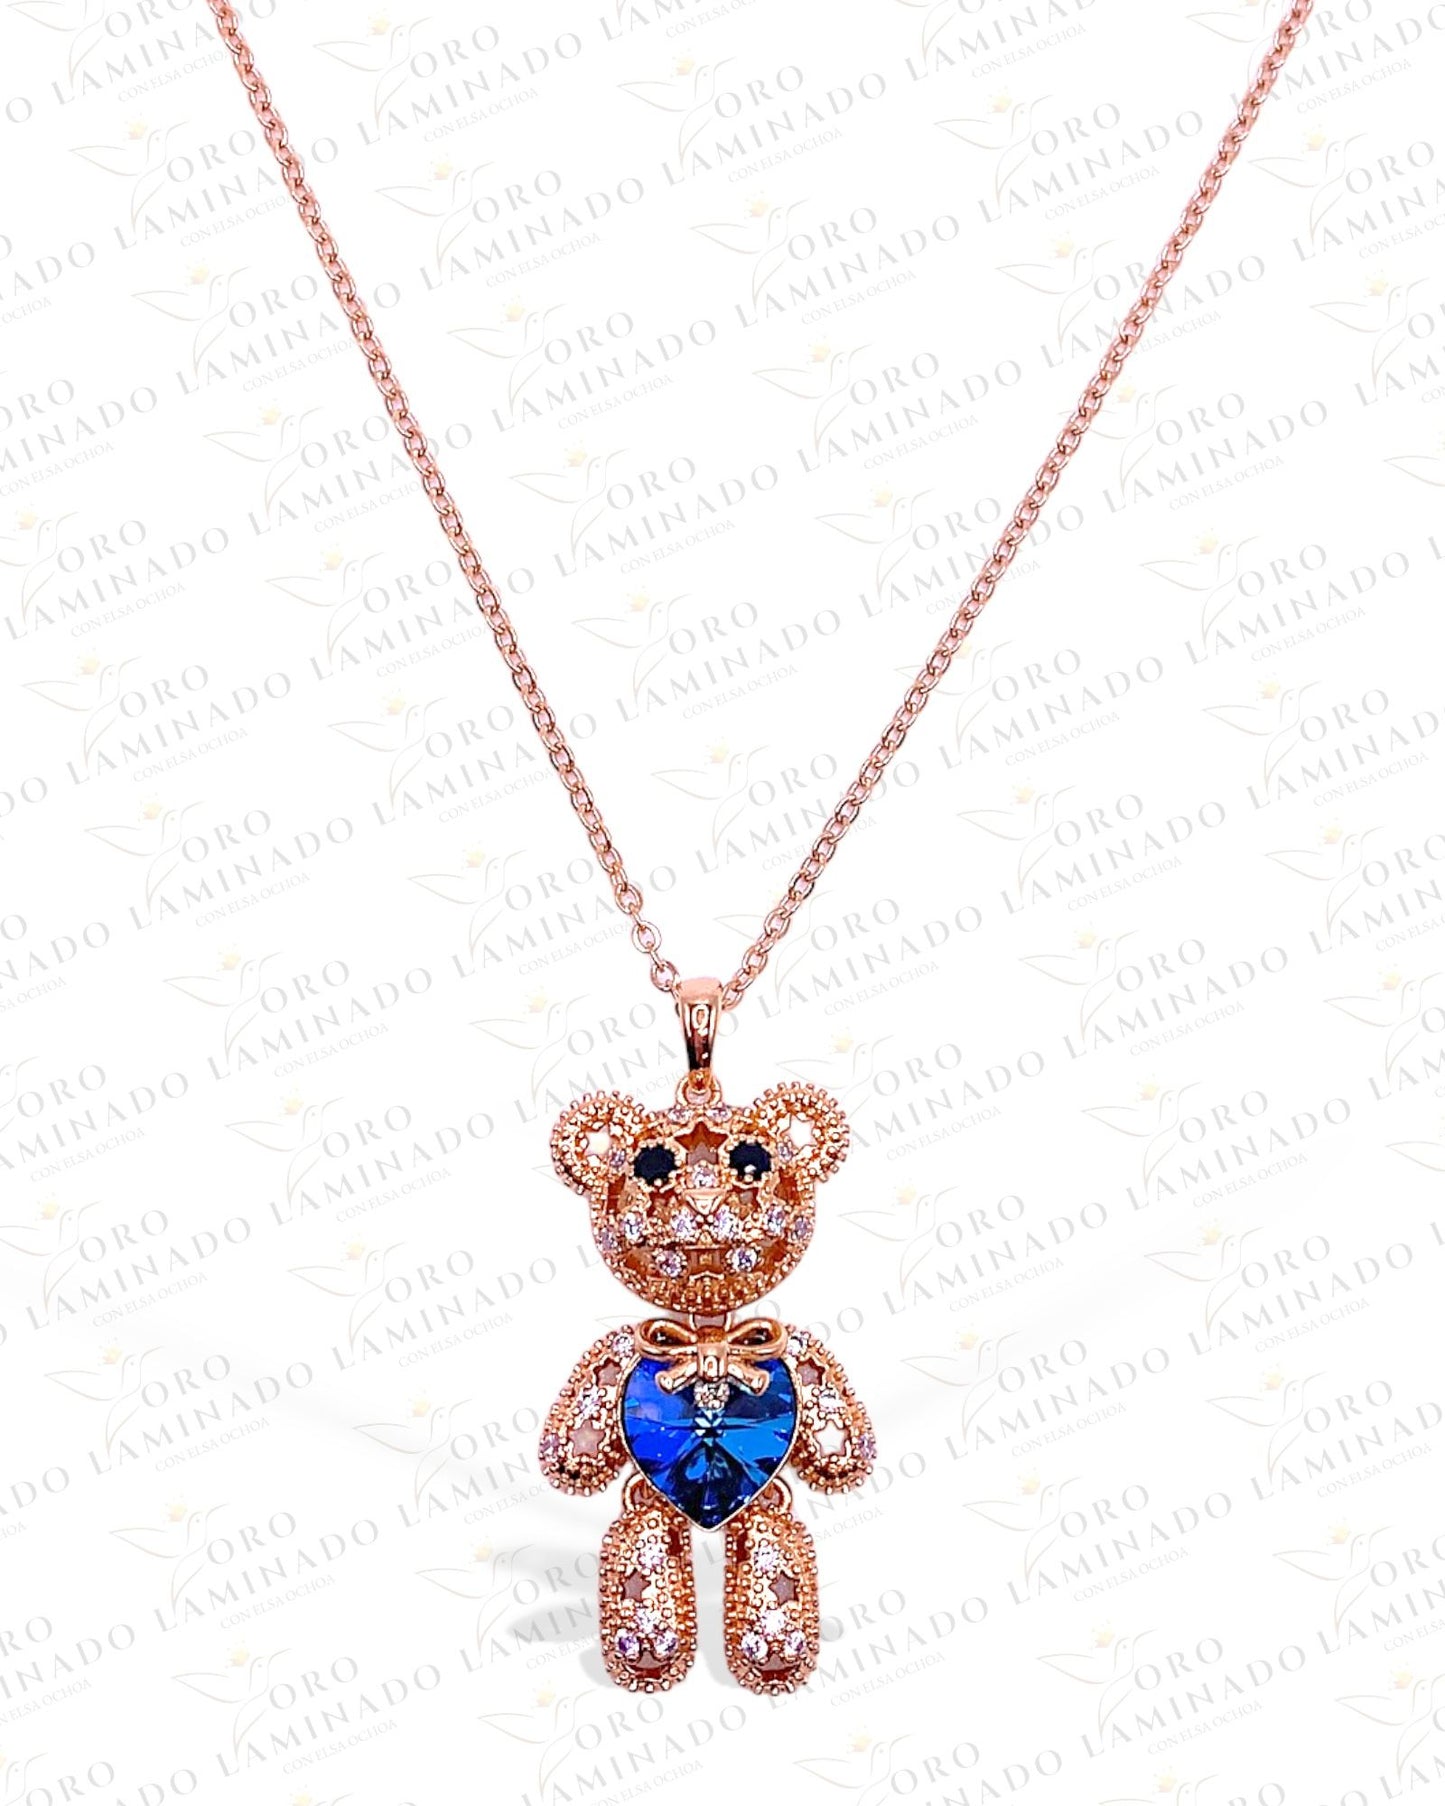 High Quality 1.5”  Blue Bear Pendant And Chain R179